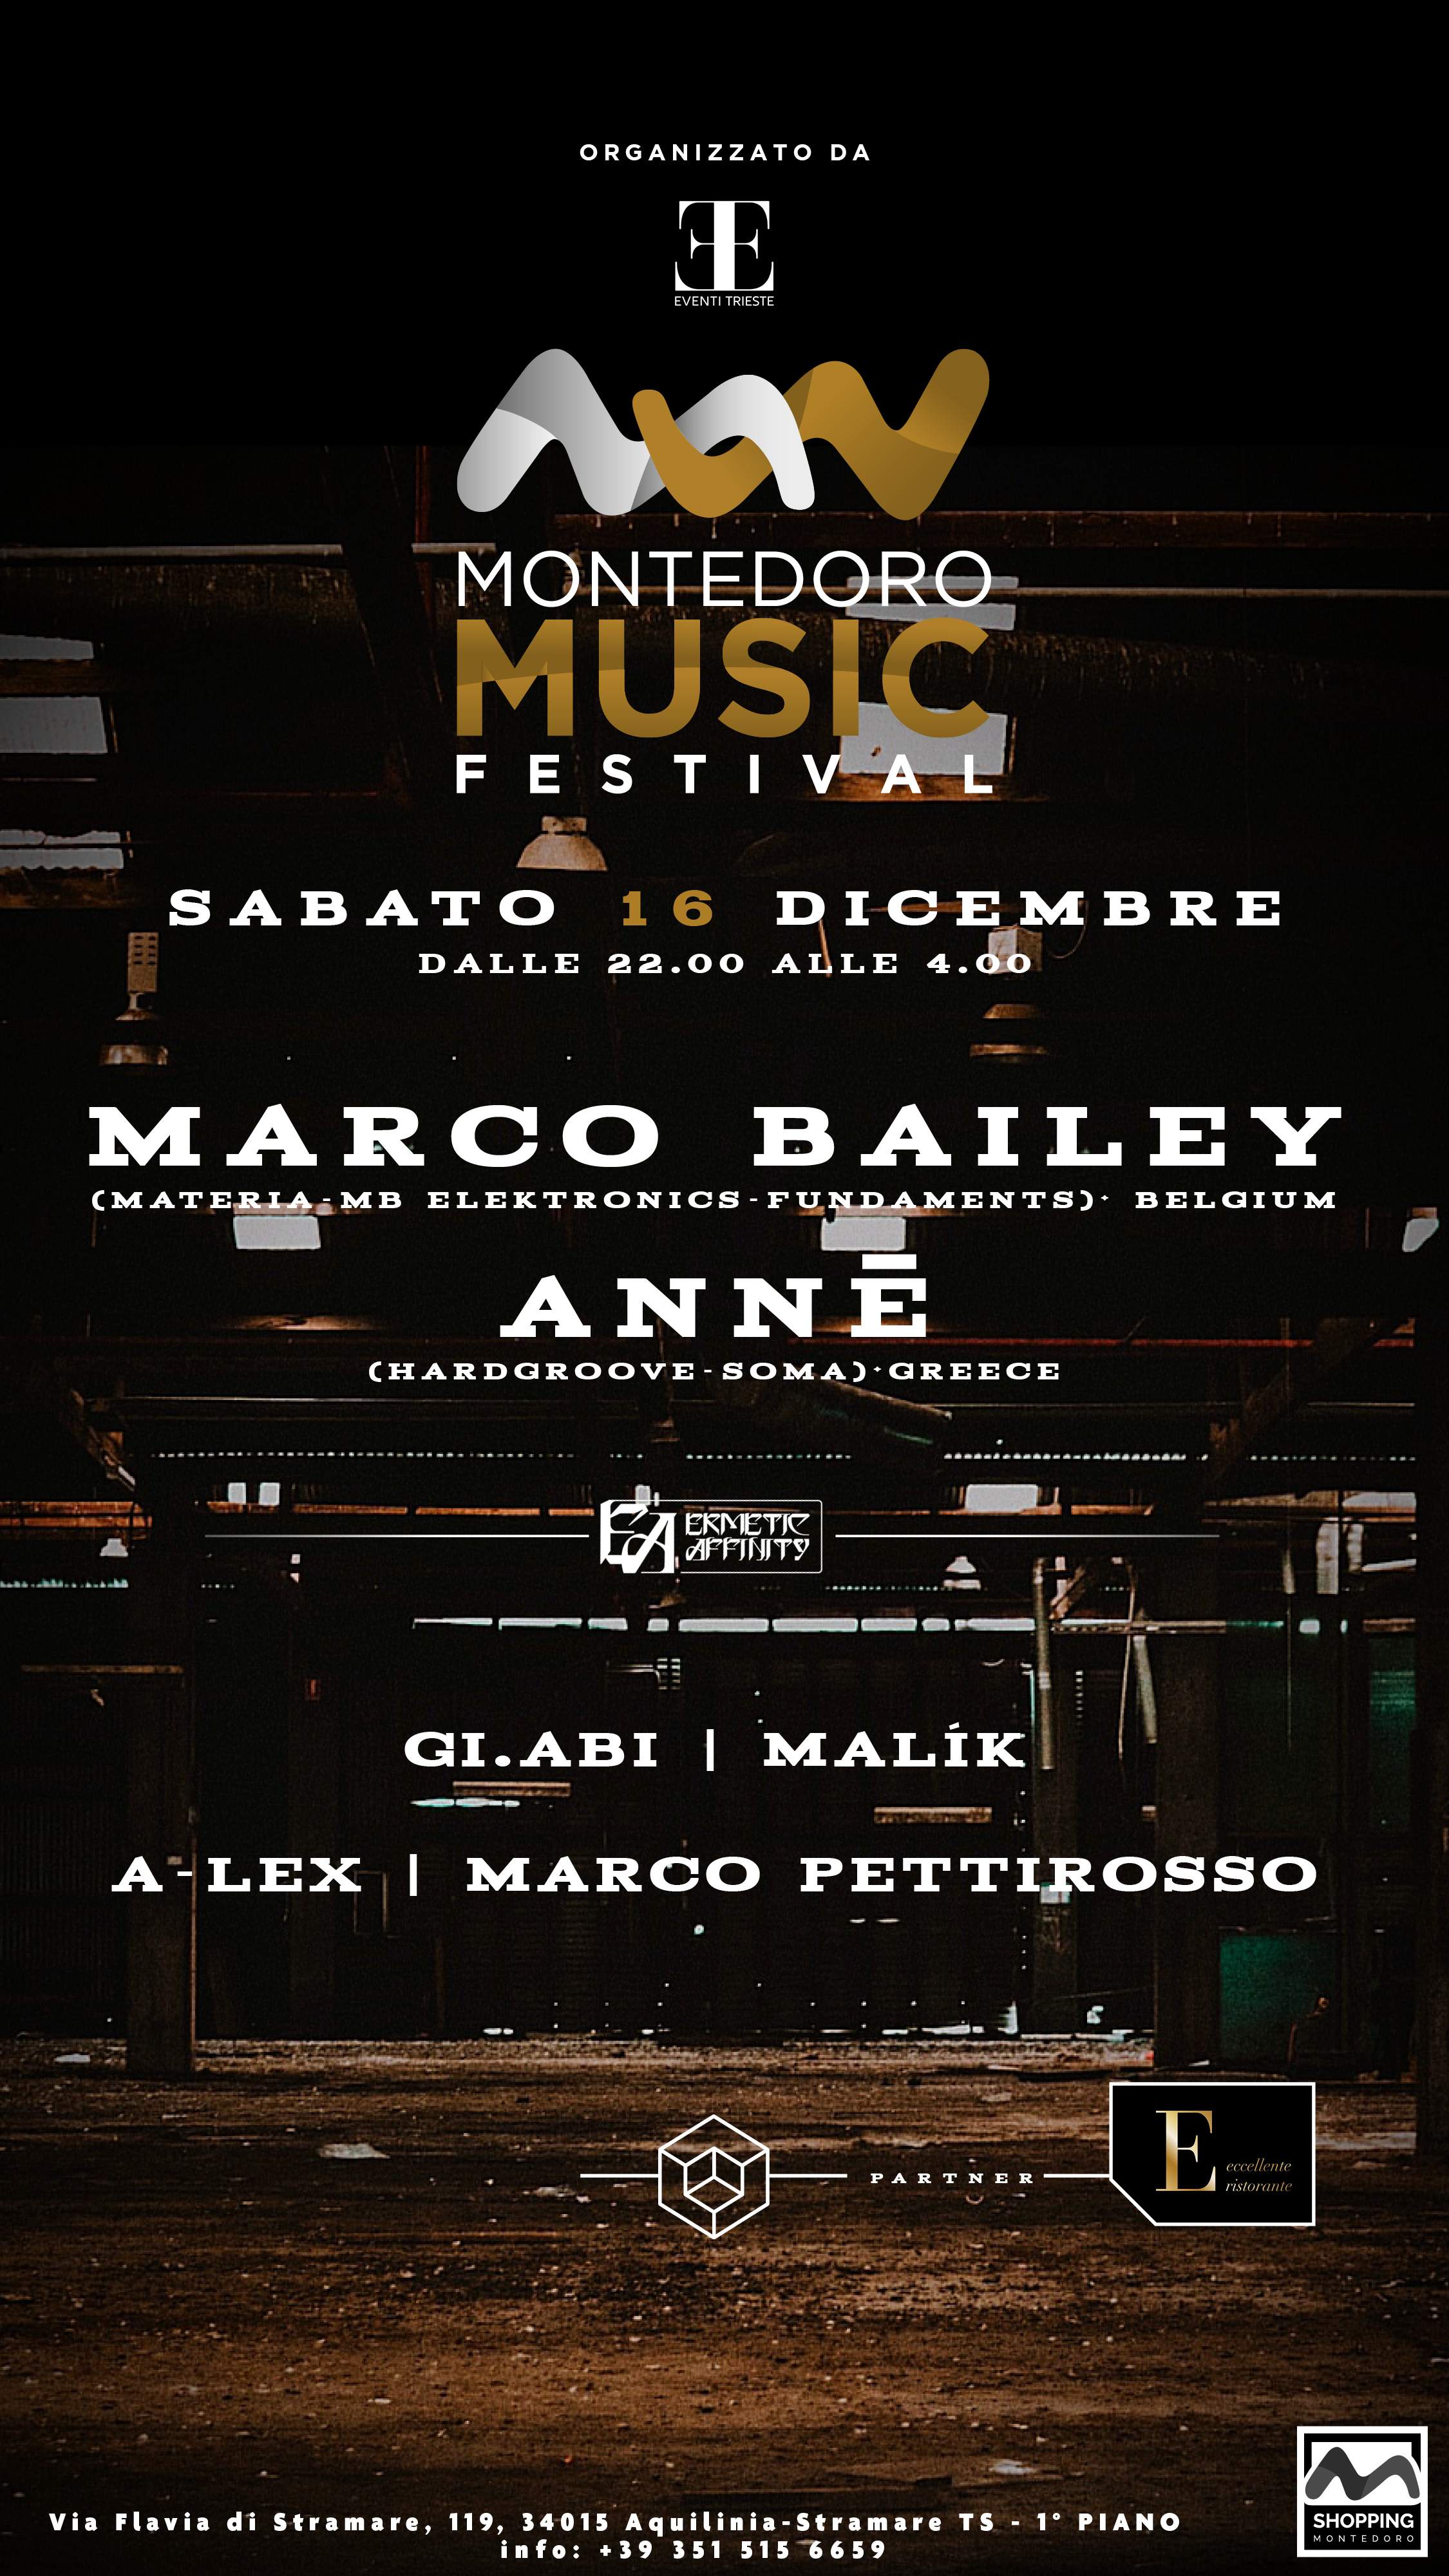 MONTEDORO MUSIC FESTIVAL with ERMETIC AFFINITY present: Marco Bailey & ANNĒ - Página frontal